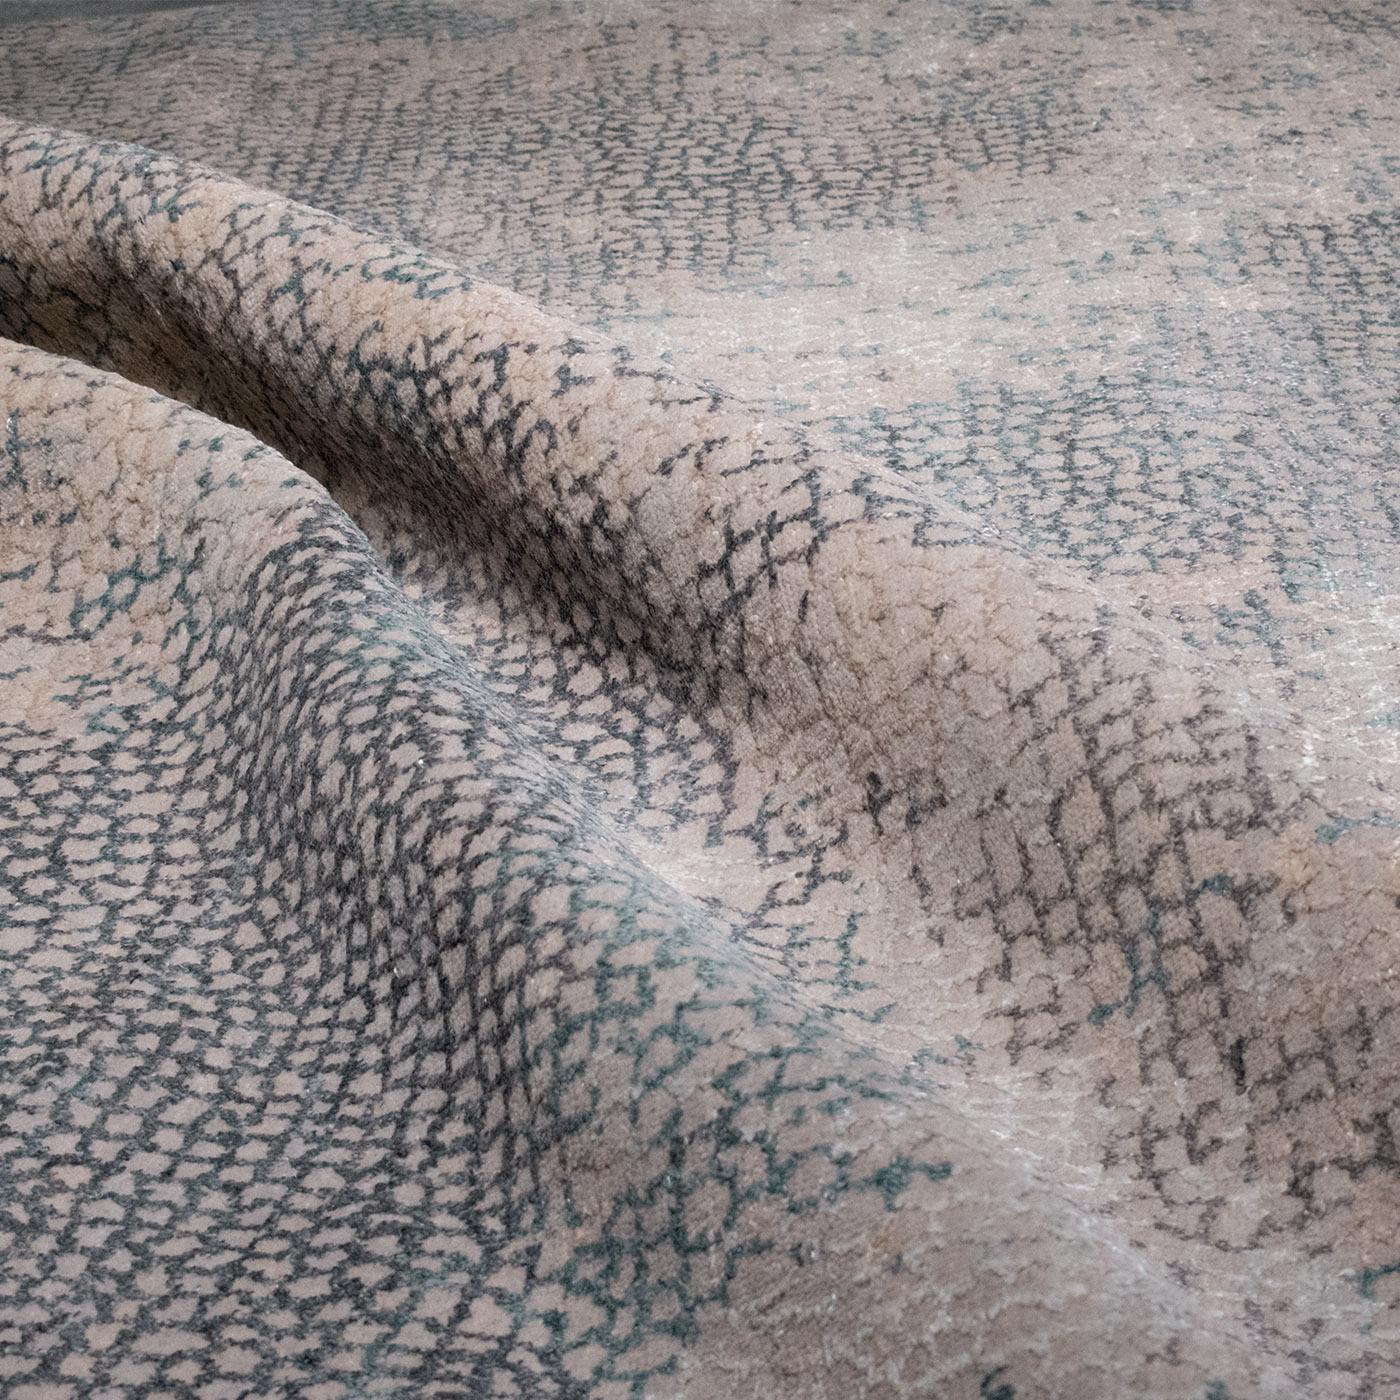 This superb artisan rug is hand-knotted on two layers using a Persian-knot technique, revealing a hyperrealistic motif inspired by reptile skin. Its mix of fine wool and cotton yarns is dyed following only artisan and natural methods. Please do not